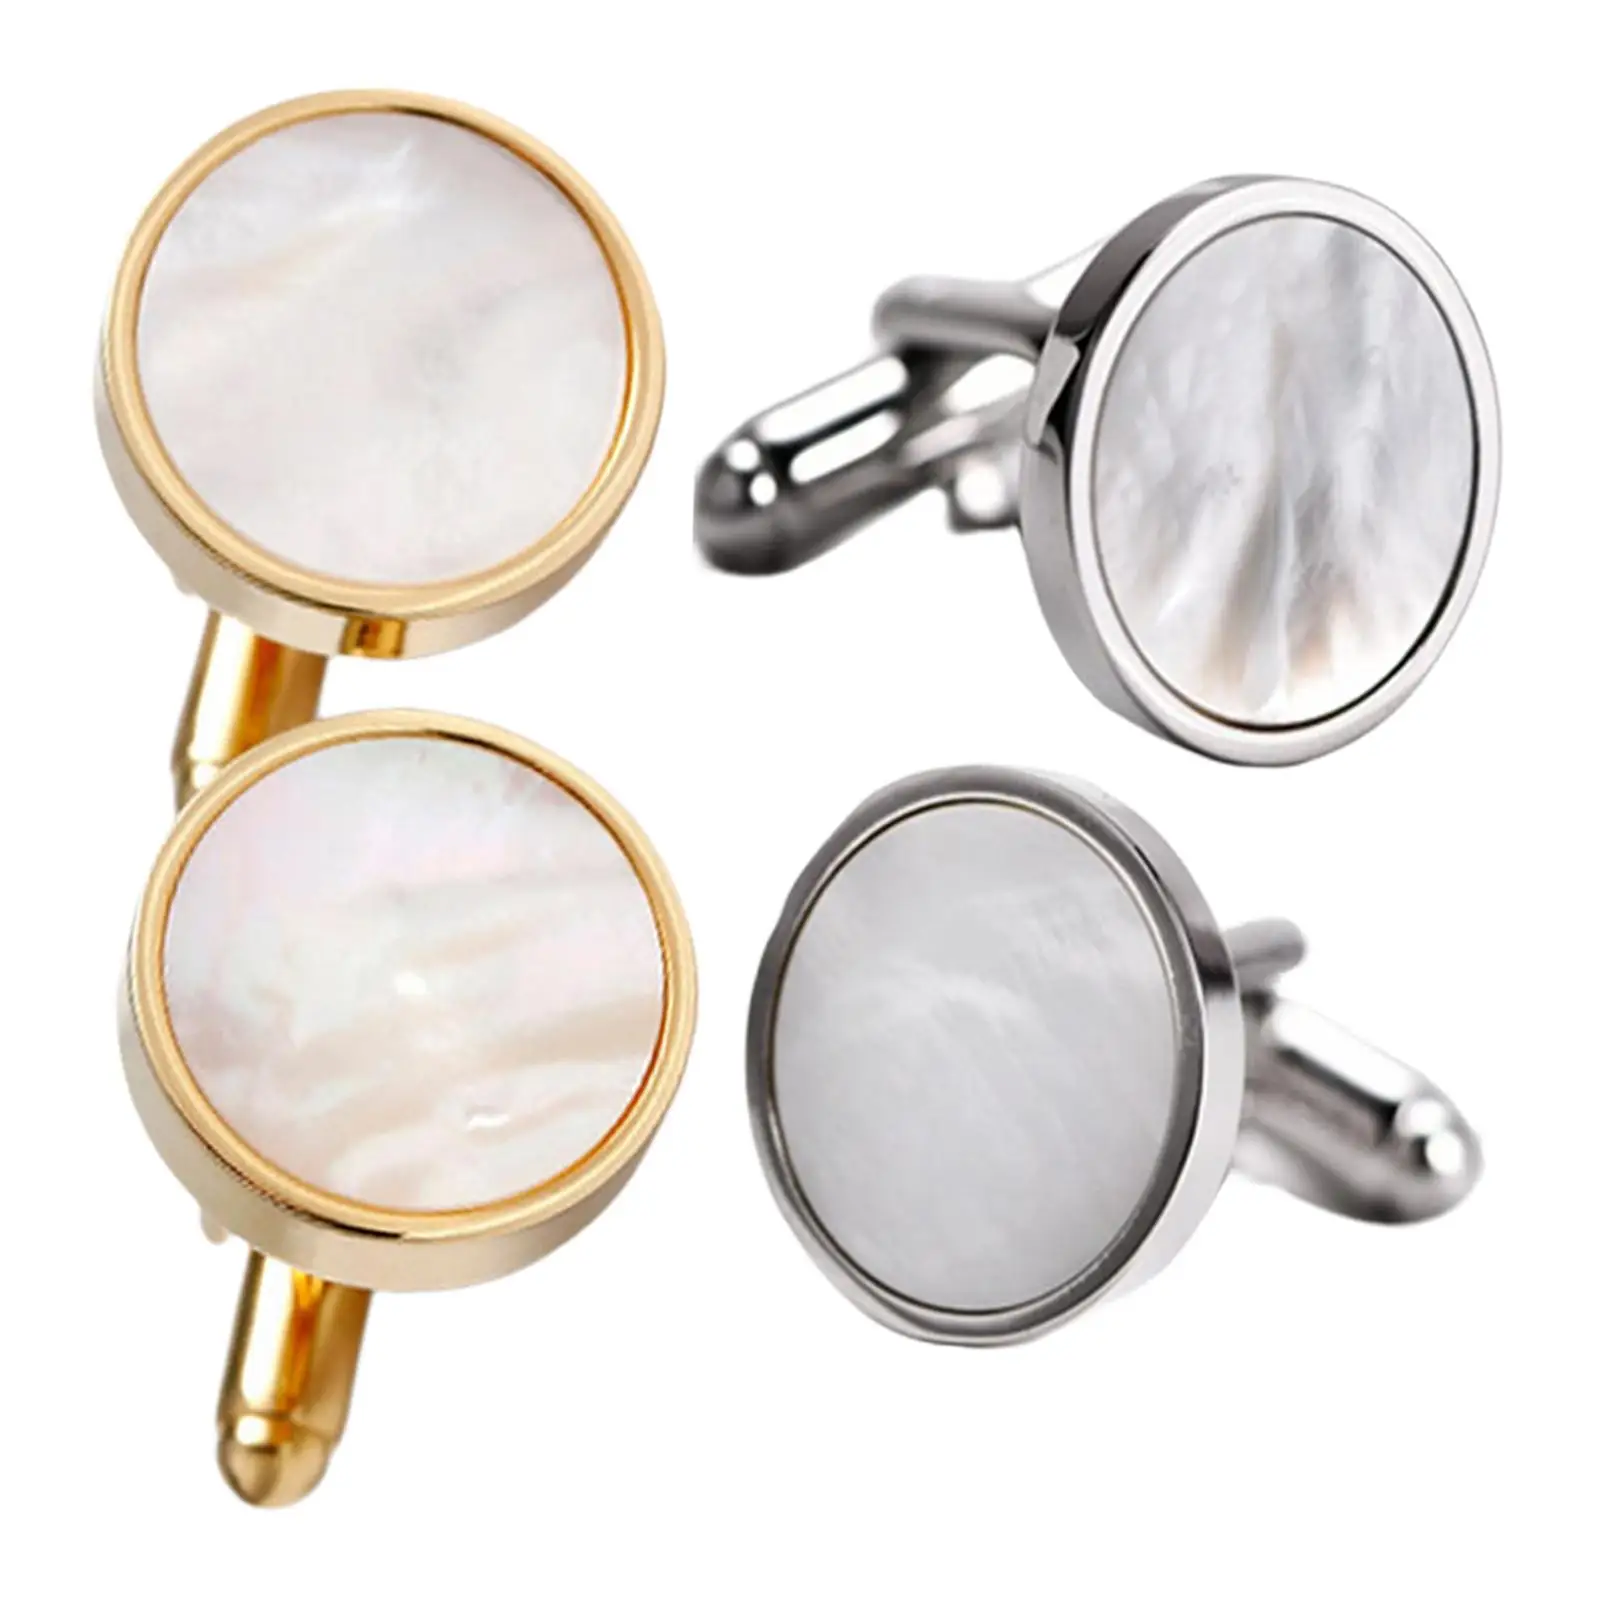 Mens Cufflinks Cuff Links Suit Simply for Gift Present Christmas Business Wedding